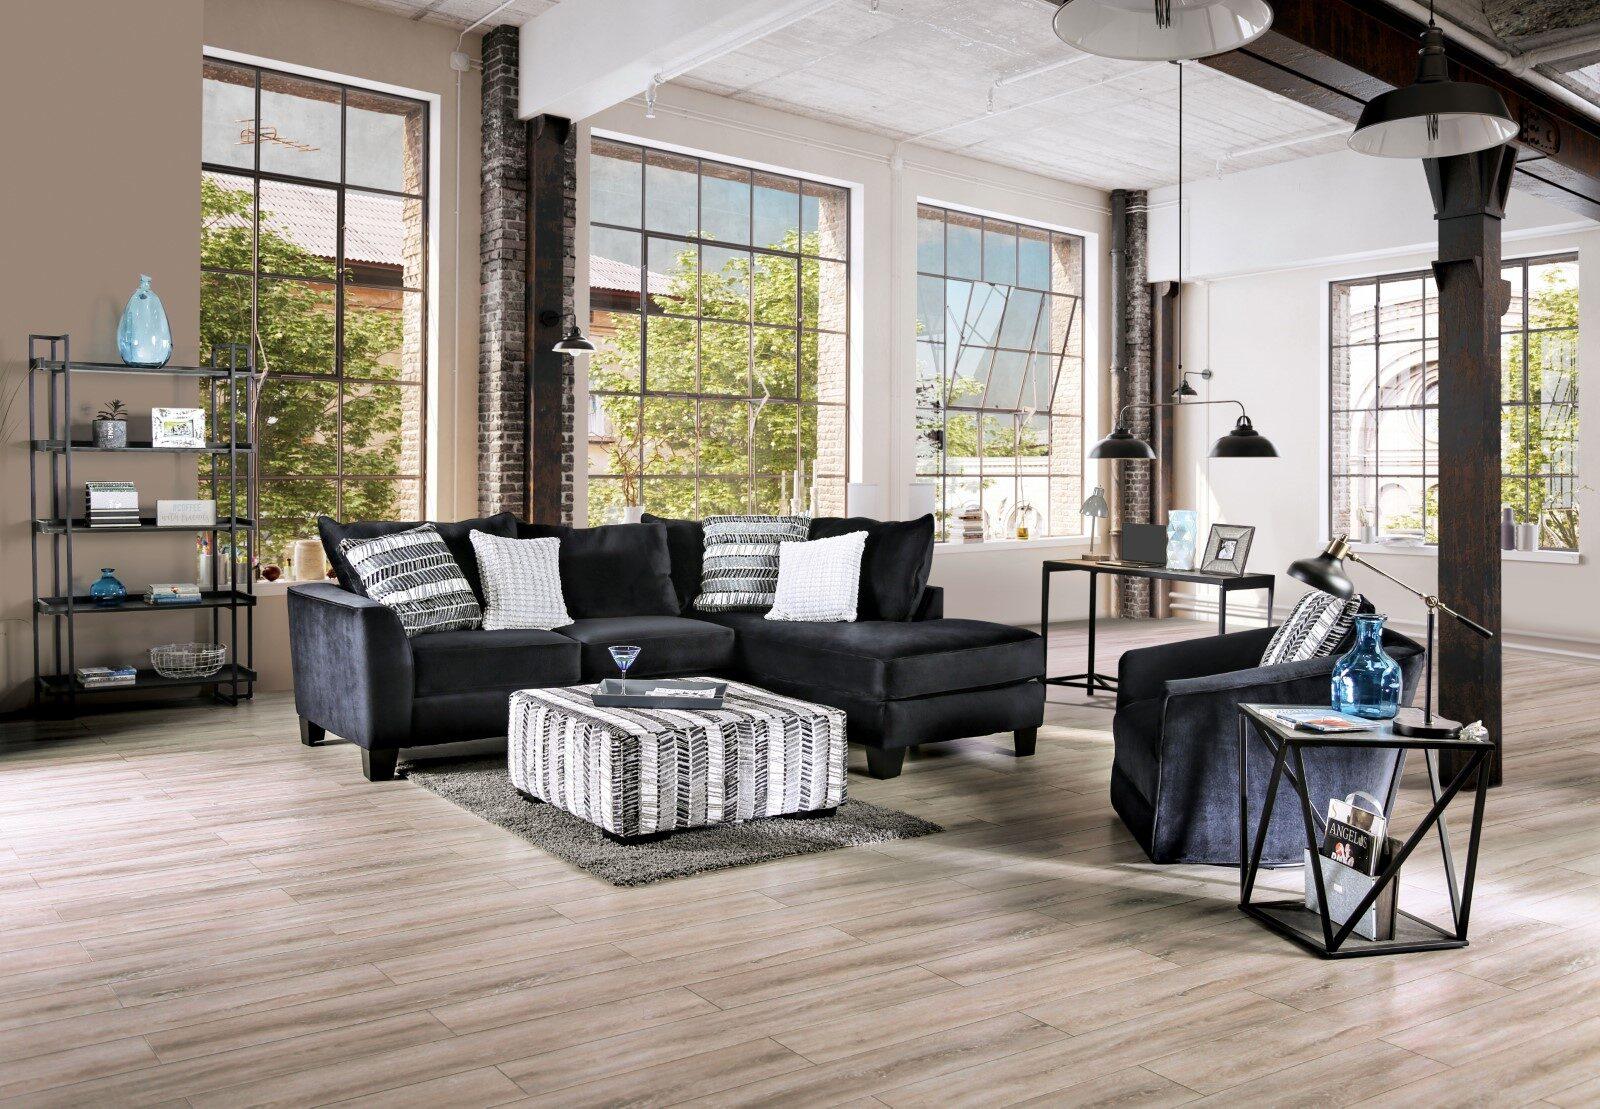 Transitional Sectional Sofa Chair and Ottoman SM5160-3PC Modbury SM5160-3PC in Black Microfiber